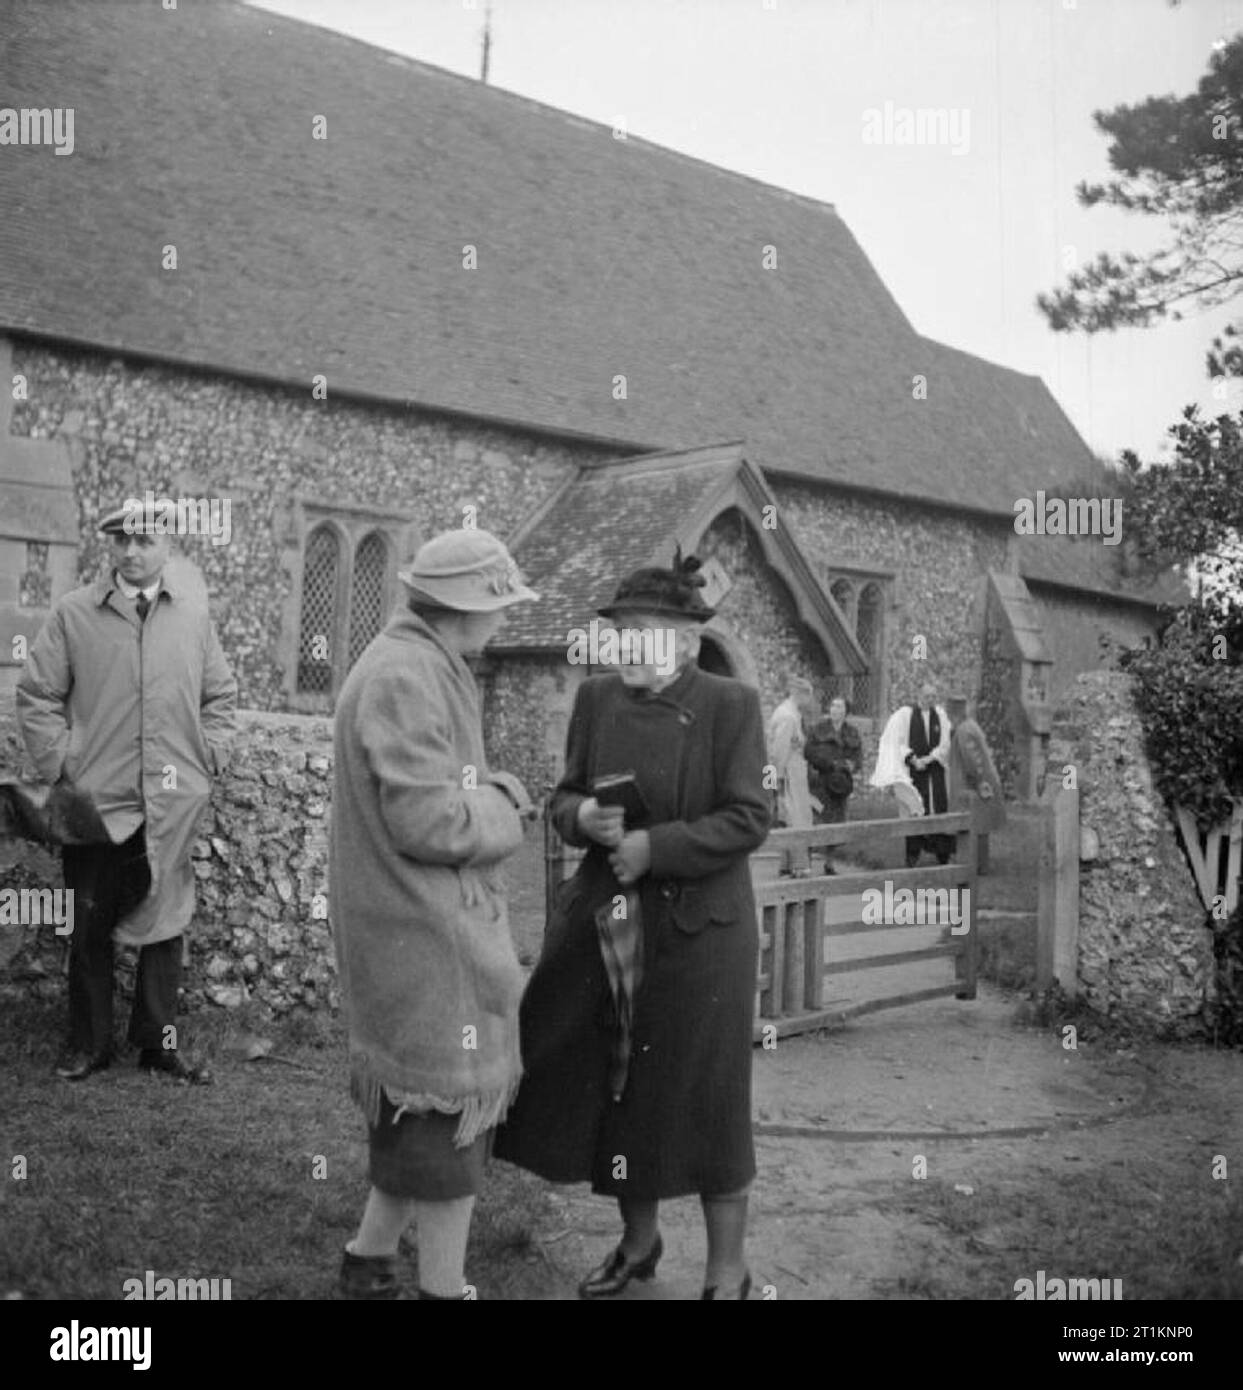 Mrs Bugler Goes To War- Everyday Life in East Dean, Sussex, England, 1943 Mrs Bugler chats to a friend outside the Church of St Simon and St Jude, East Dean, after the Sunday service. In the background, the vicar, Reverend W E N Williams, can be seeing talking to other parishioners. Mrs Bugler's late husband is buried in this churchyard. Stock Photo